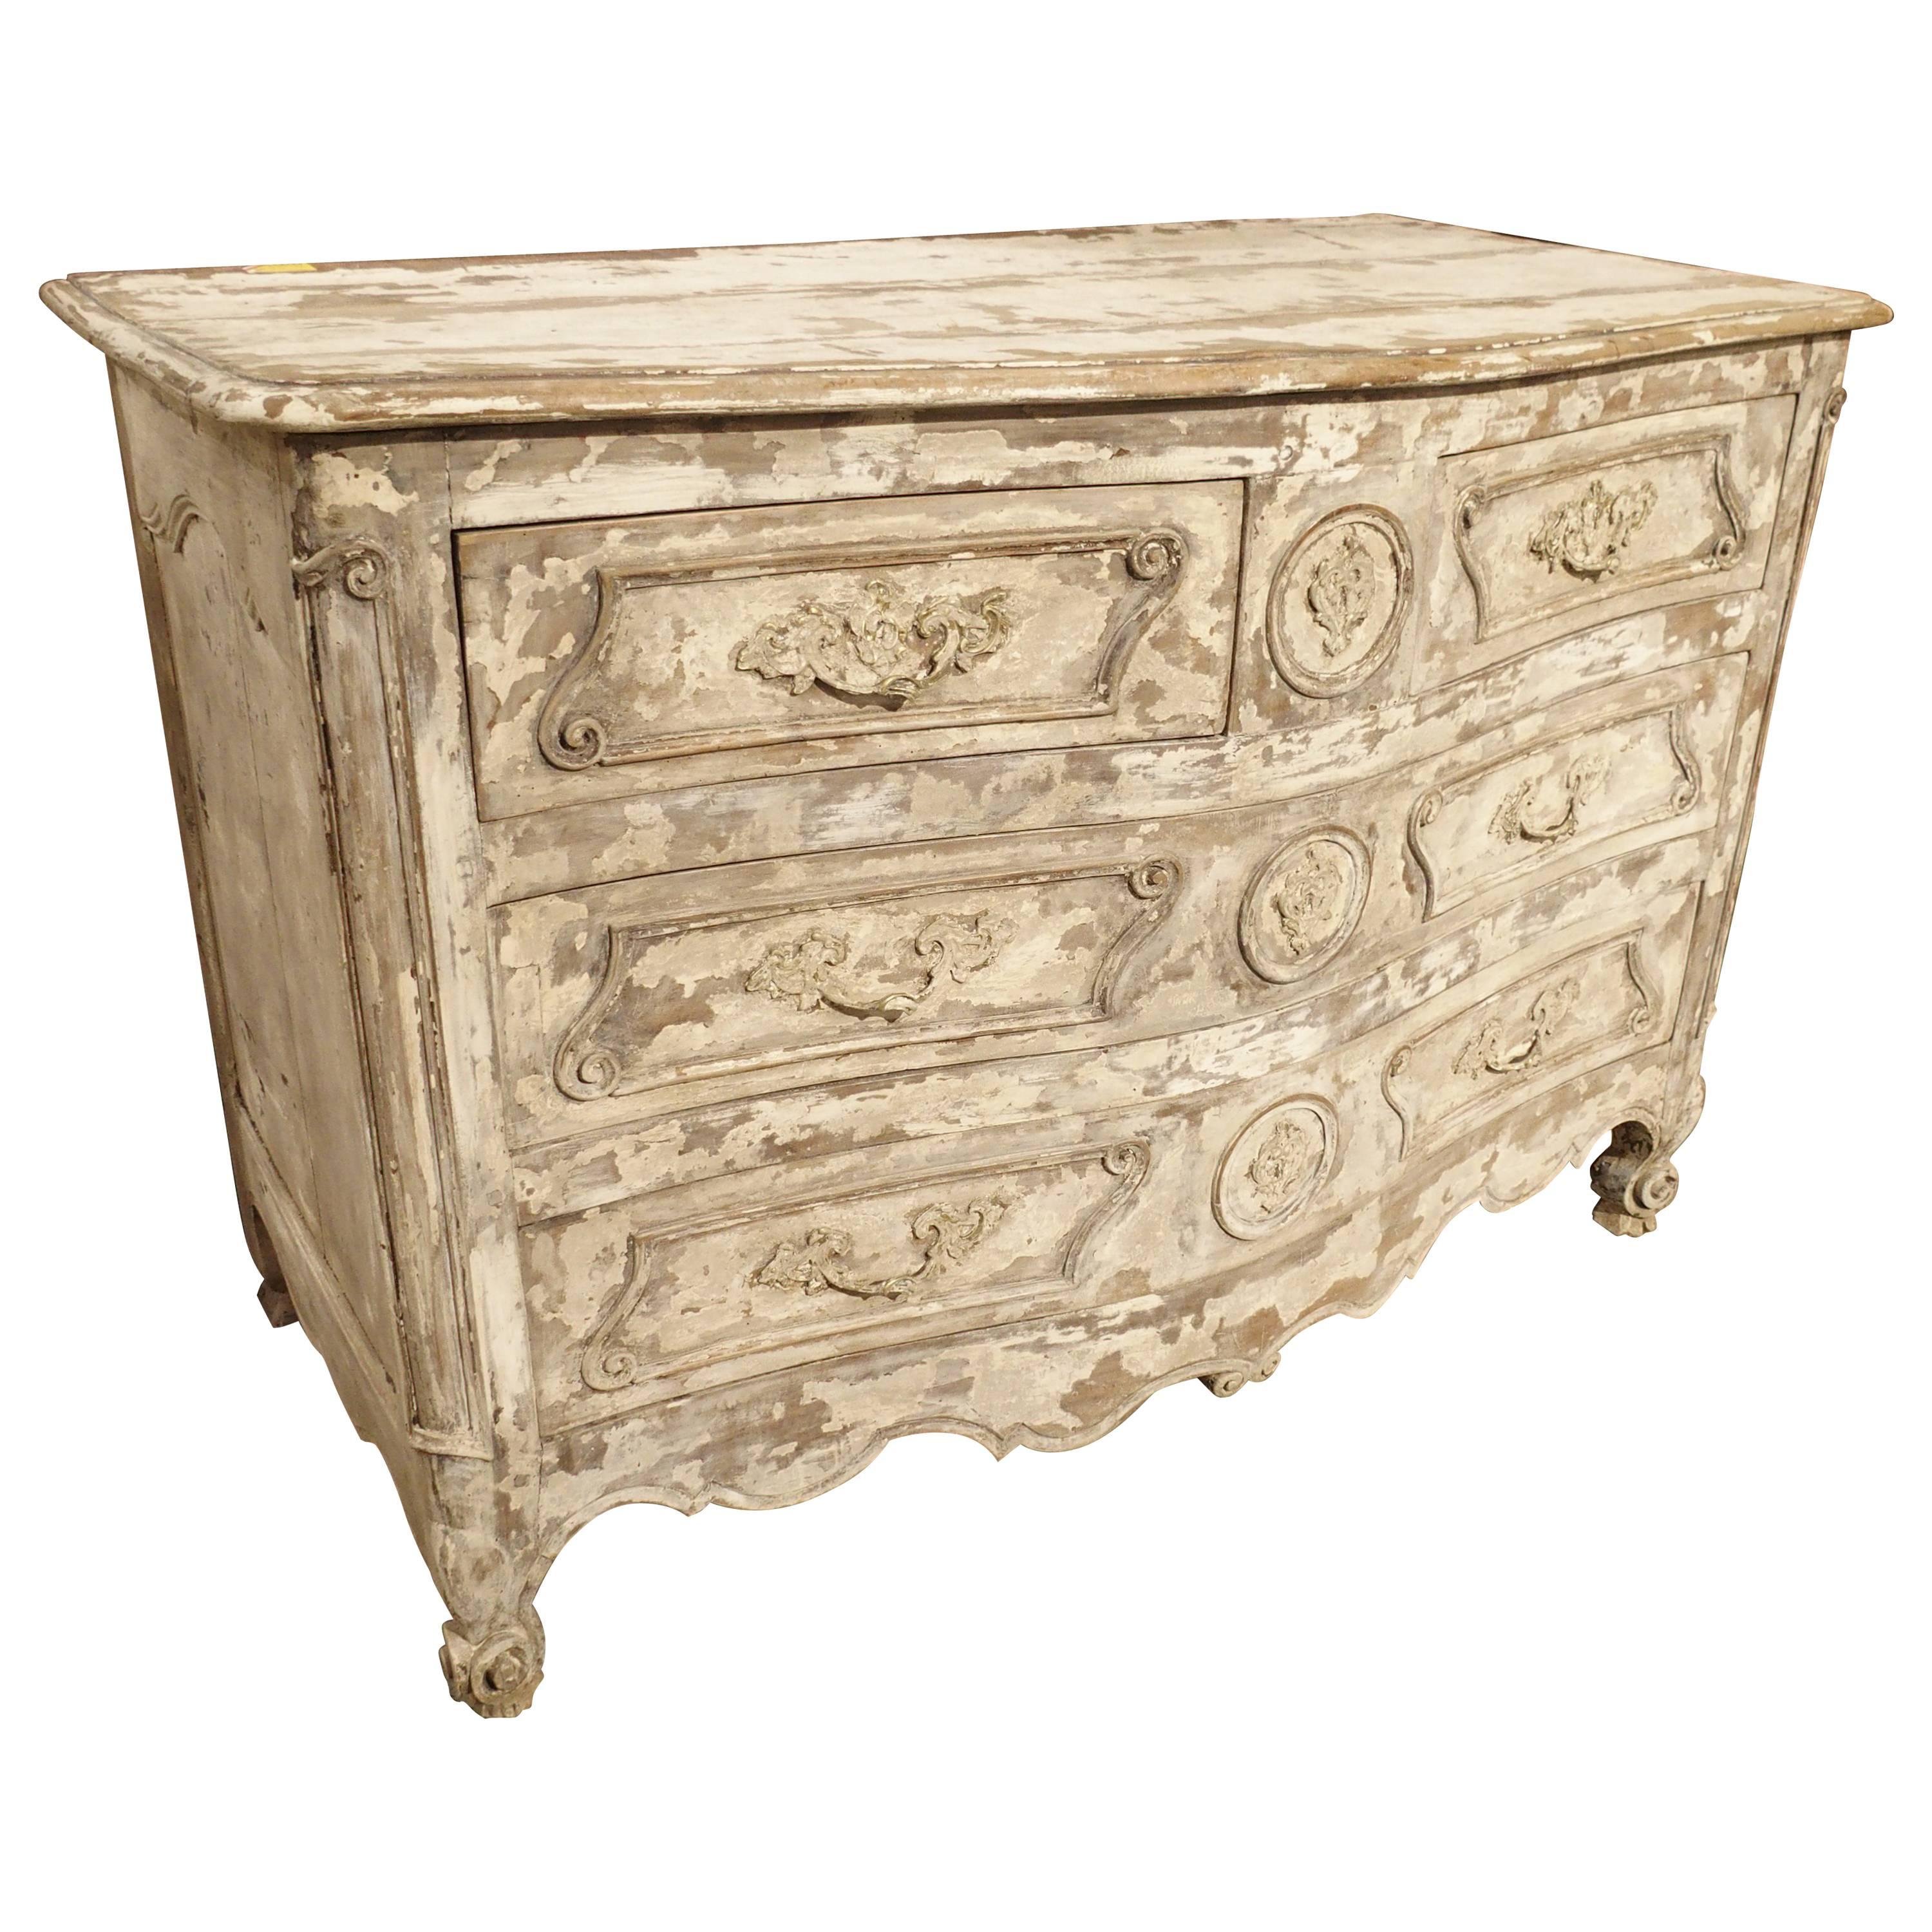 Period Louis XV Parcel Painted Commode